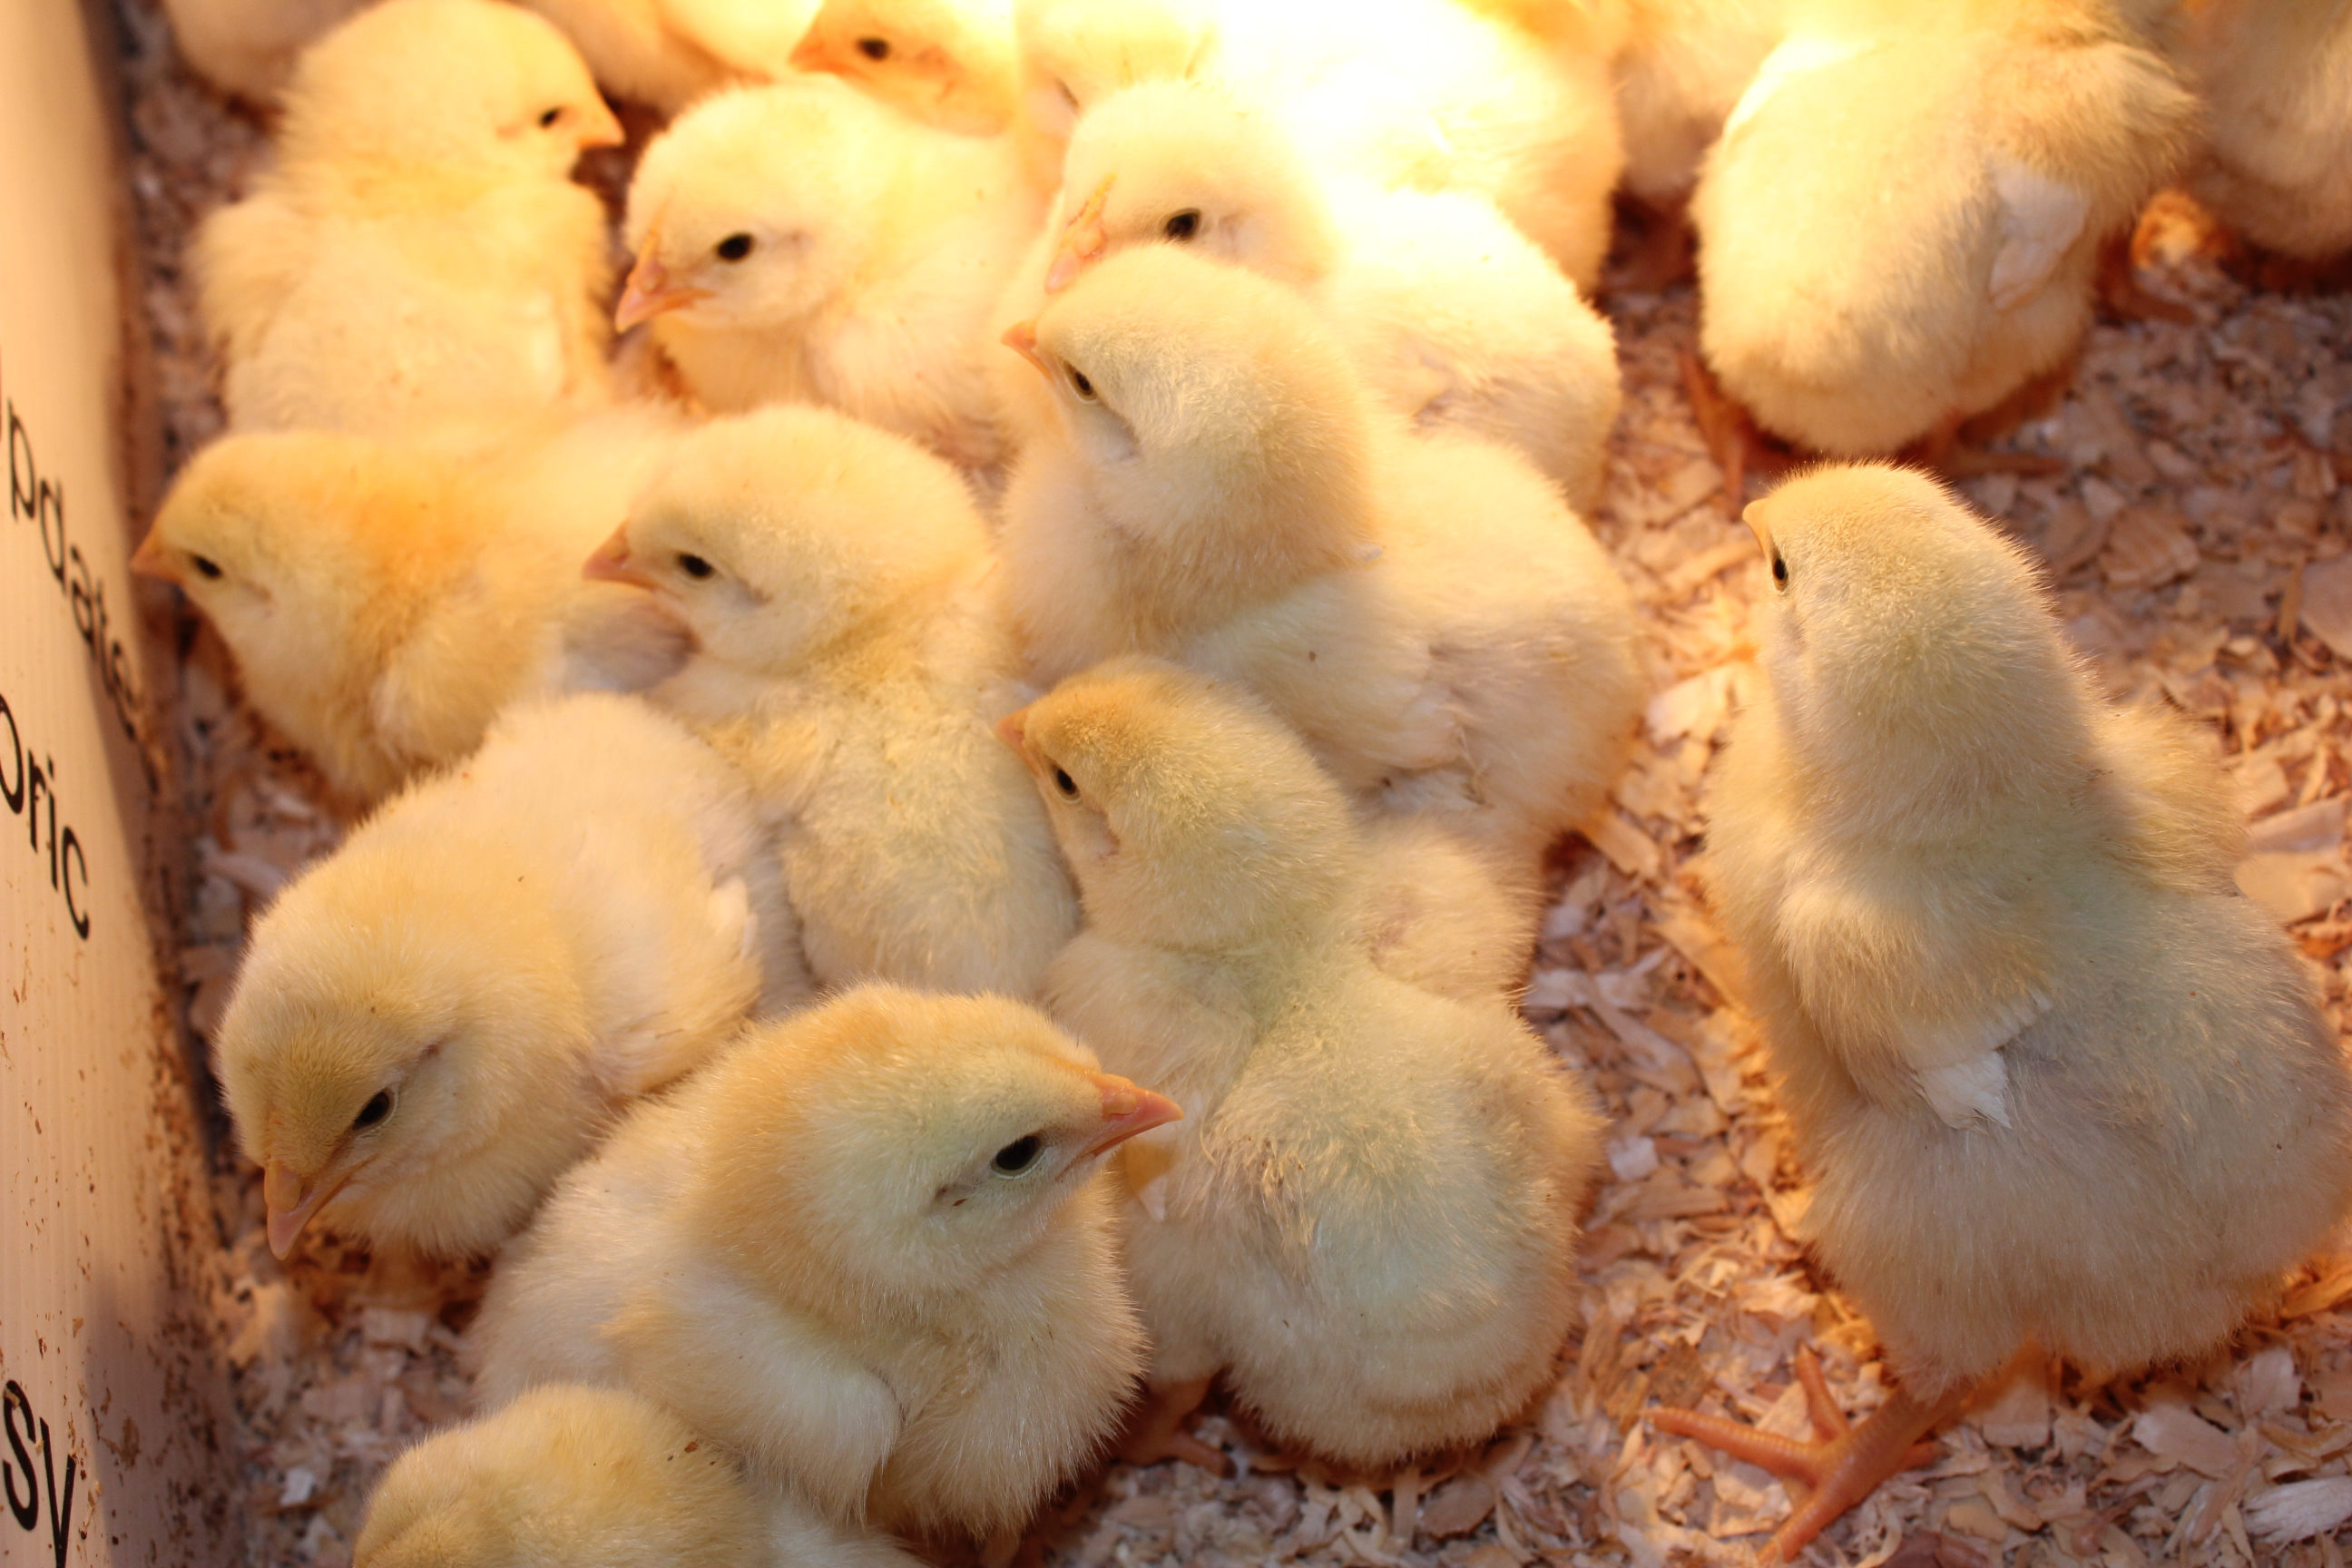 Baby chicks may carry disease-causing bacteria, but biosecurity and hygiene practices can prevent the spread of infection. (NDSU photo)